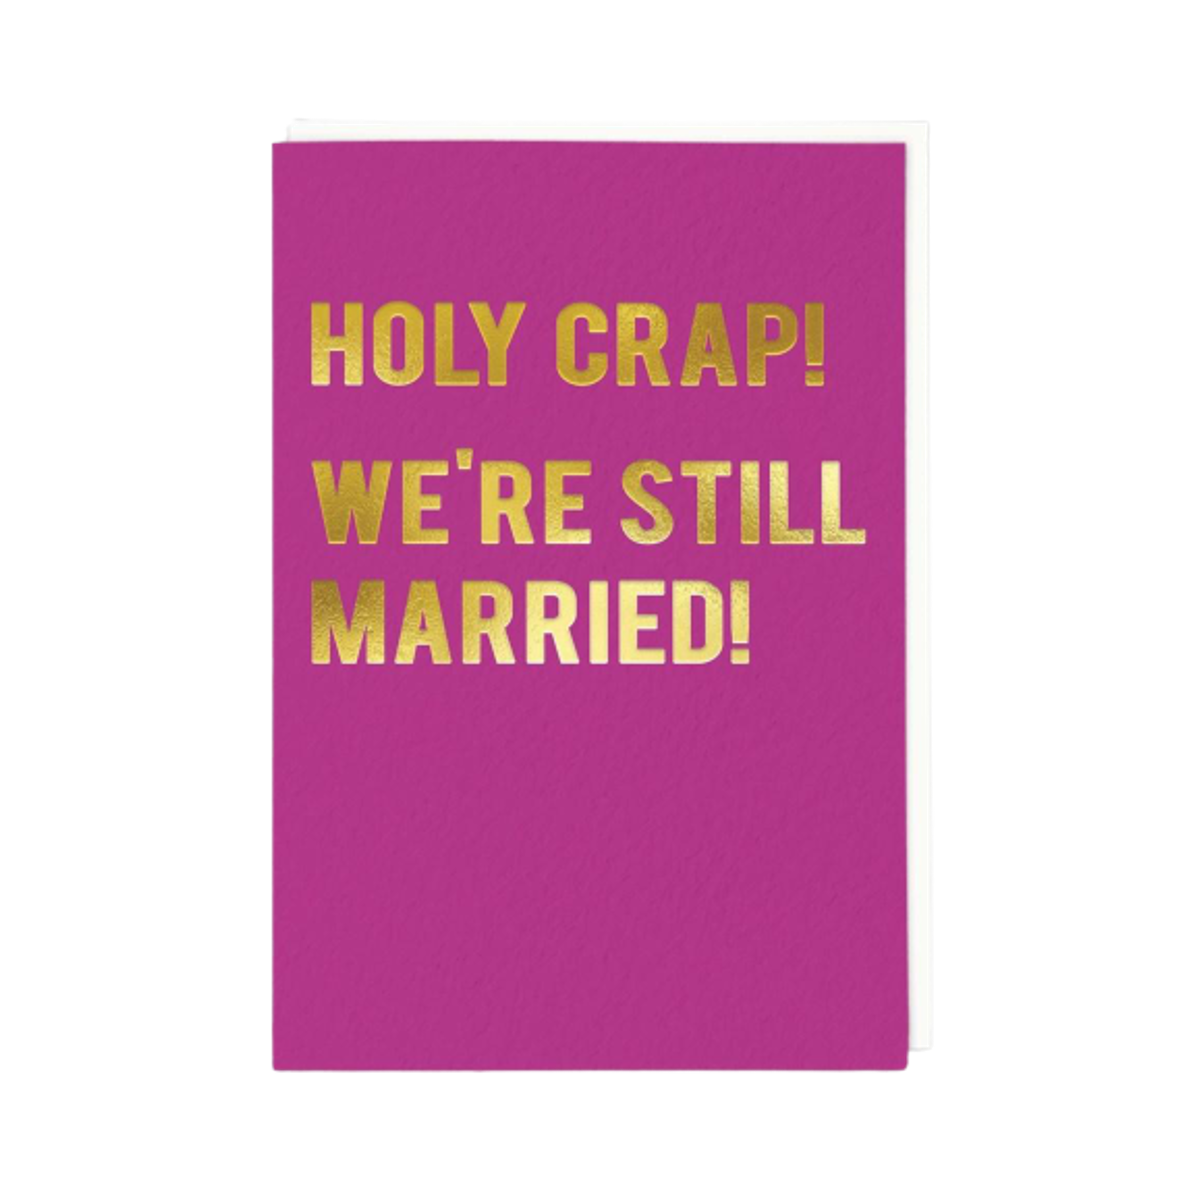 Holy Crap! We're Still Married! Greeting Card